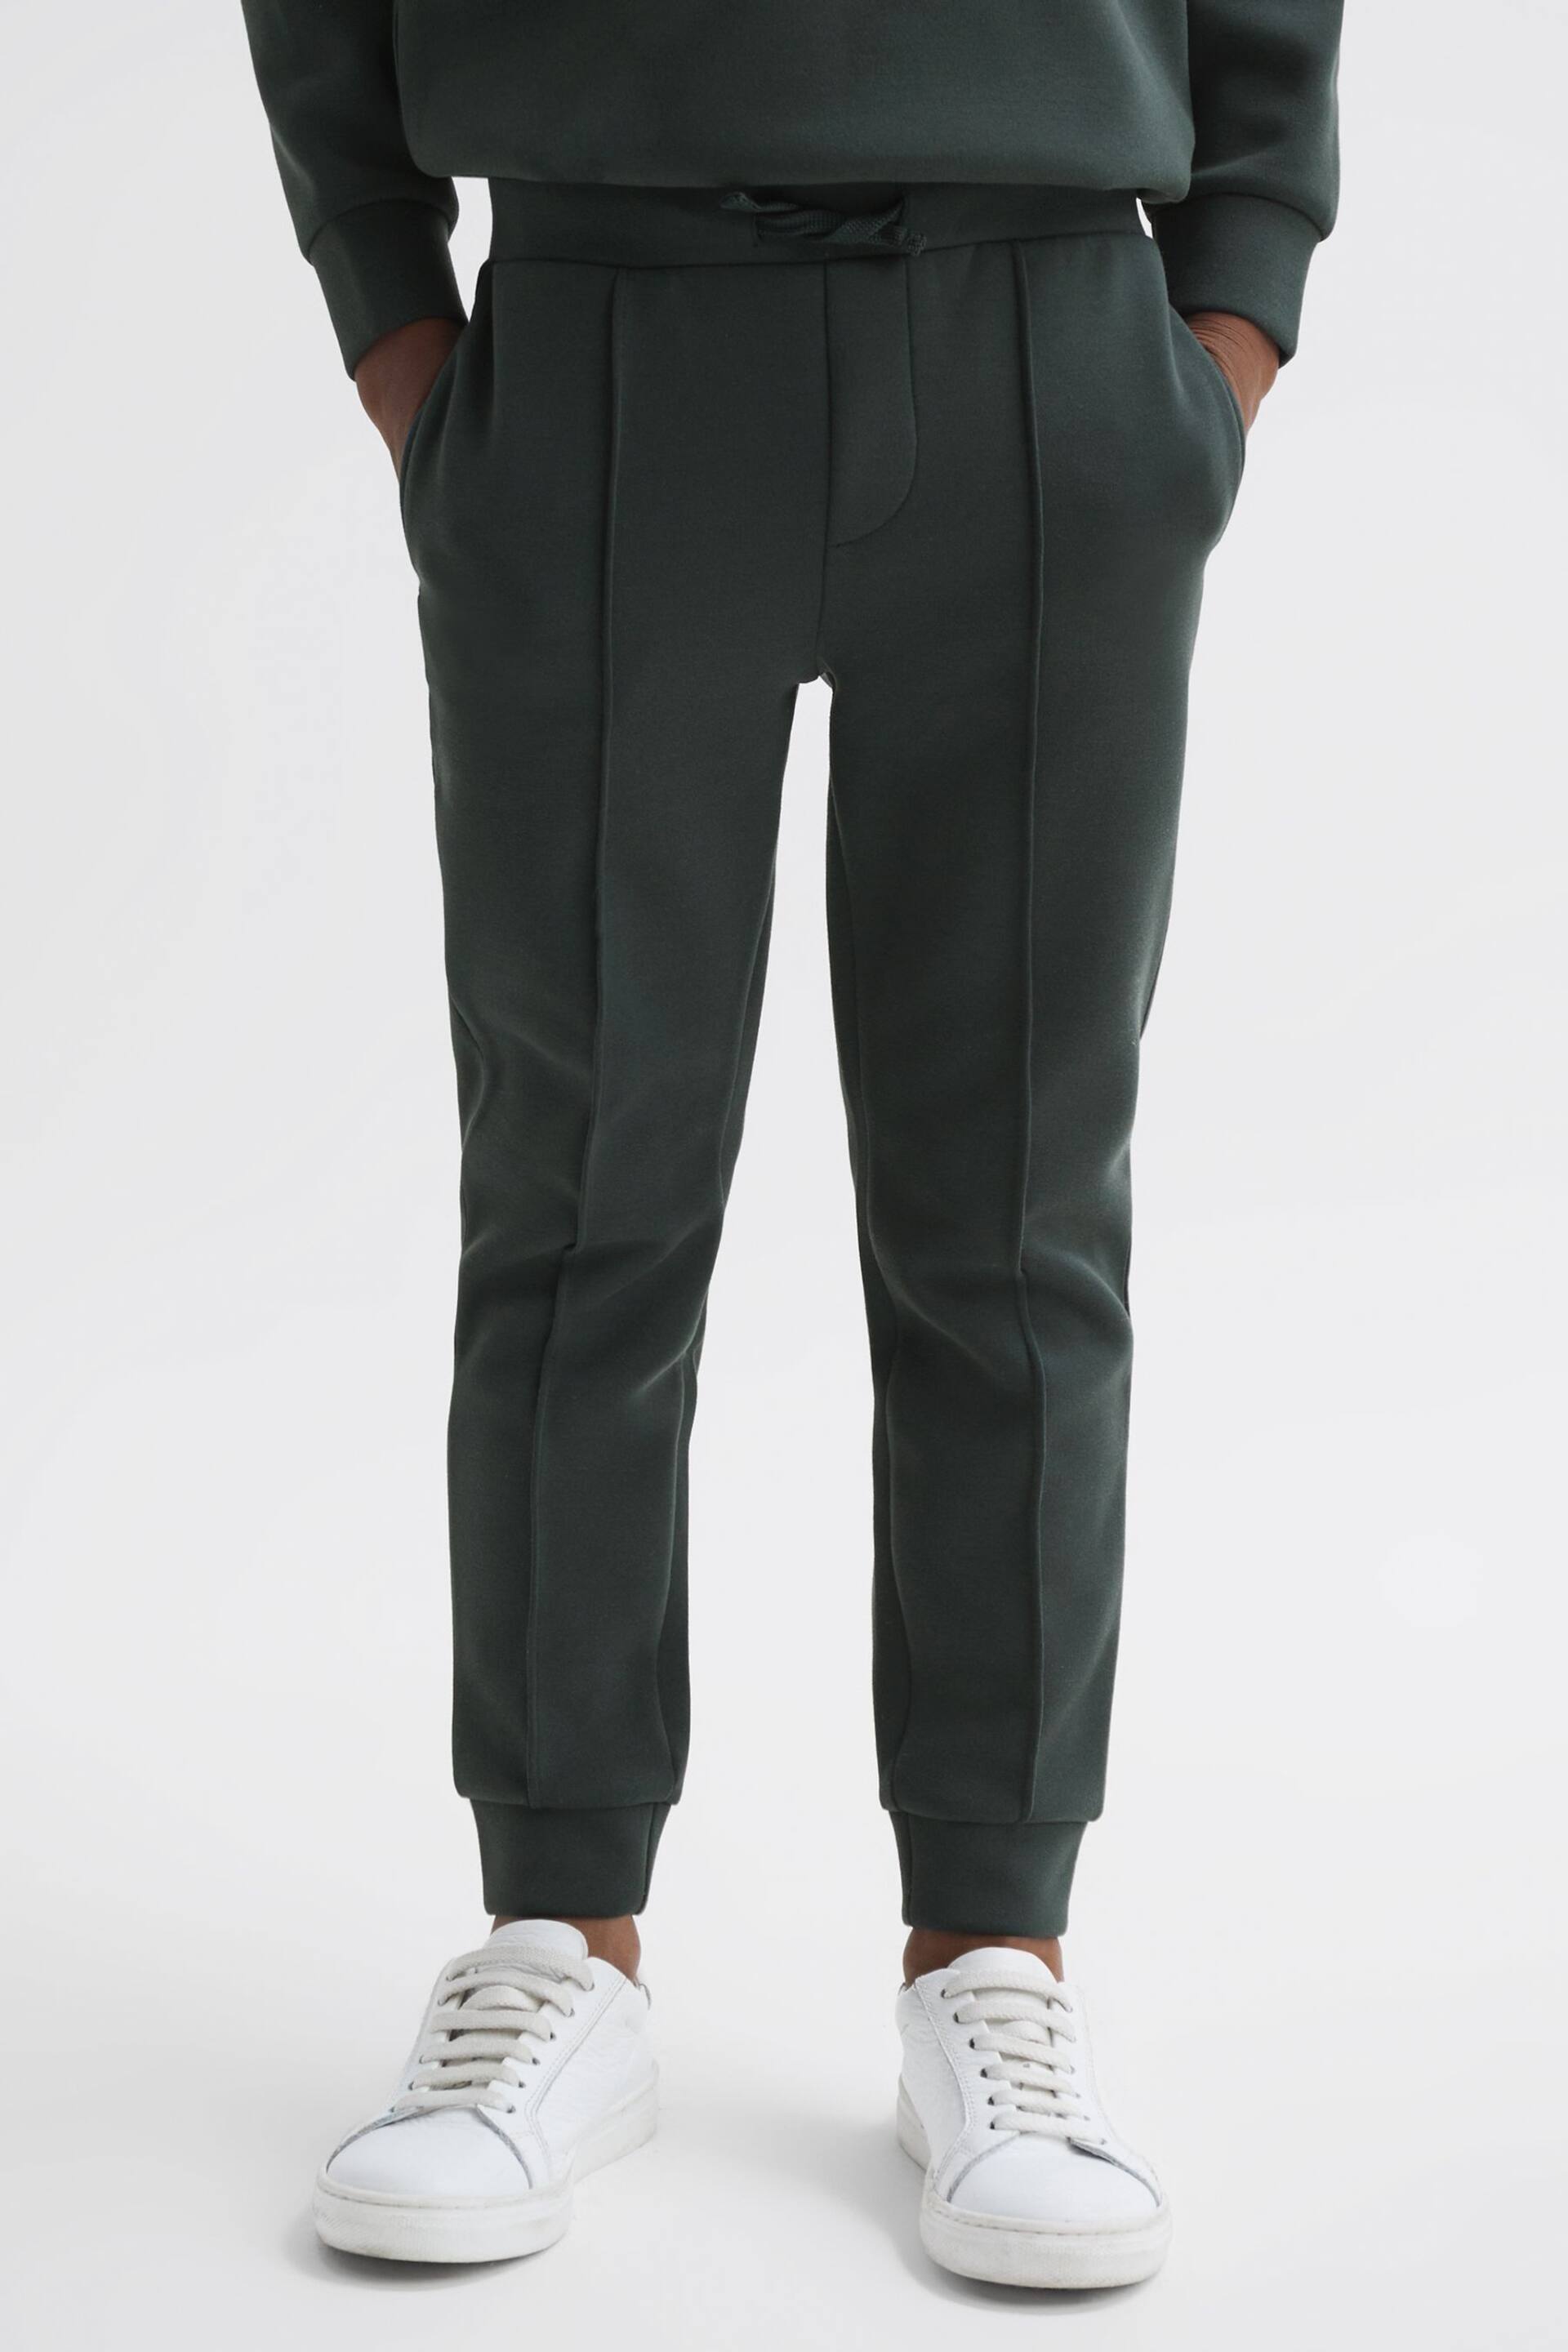 Reiss Forest Green Premier Senior Drawstring Jersey Joggers - Image 1 of 5